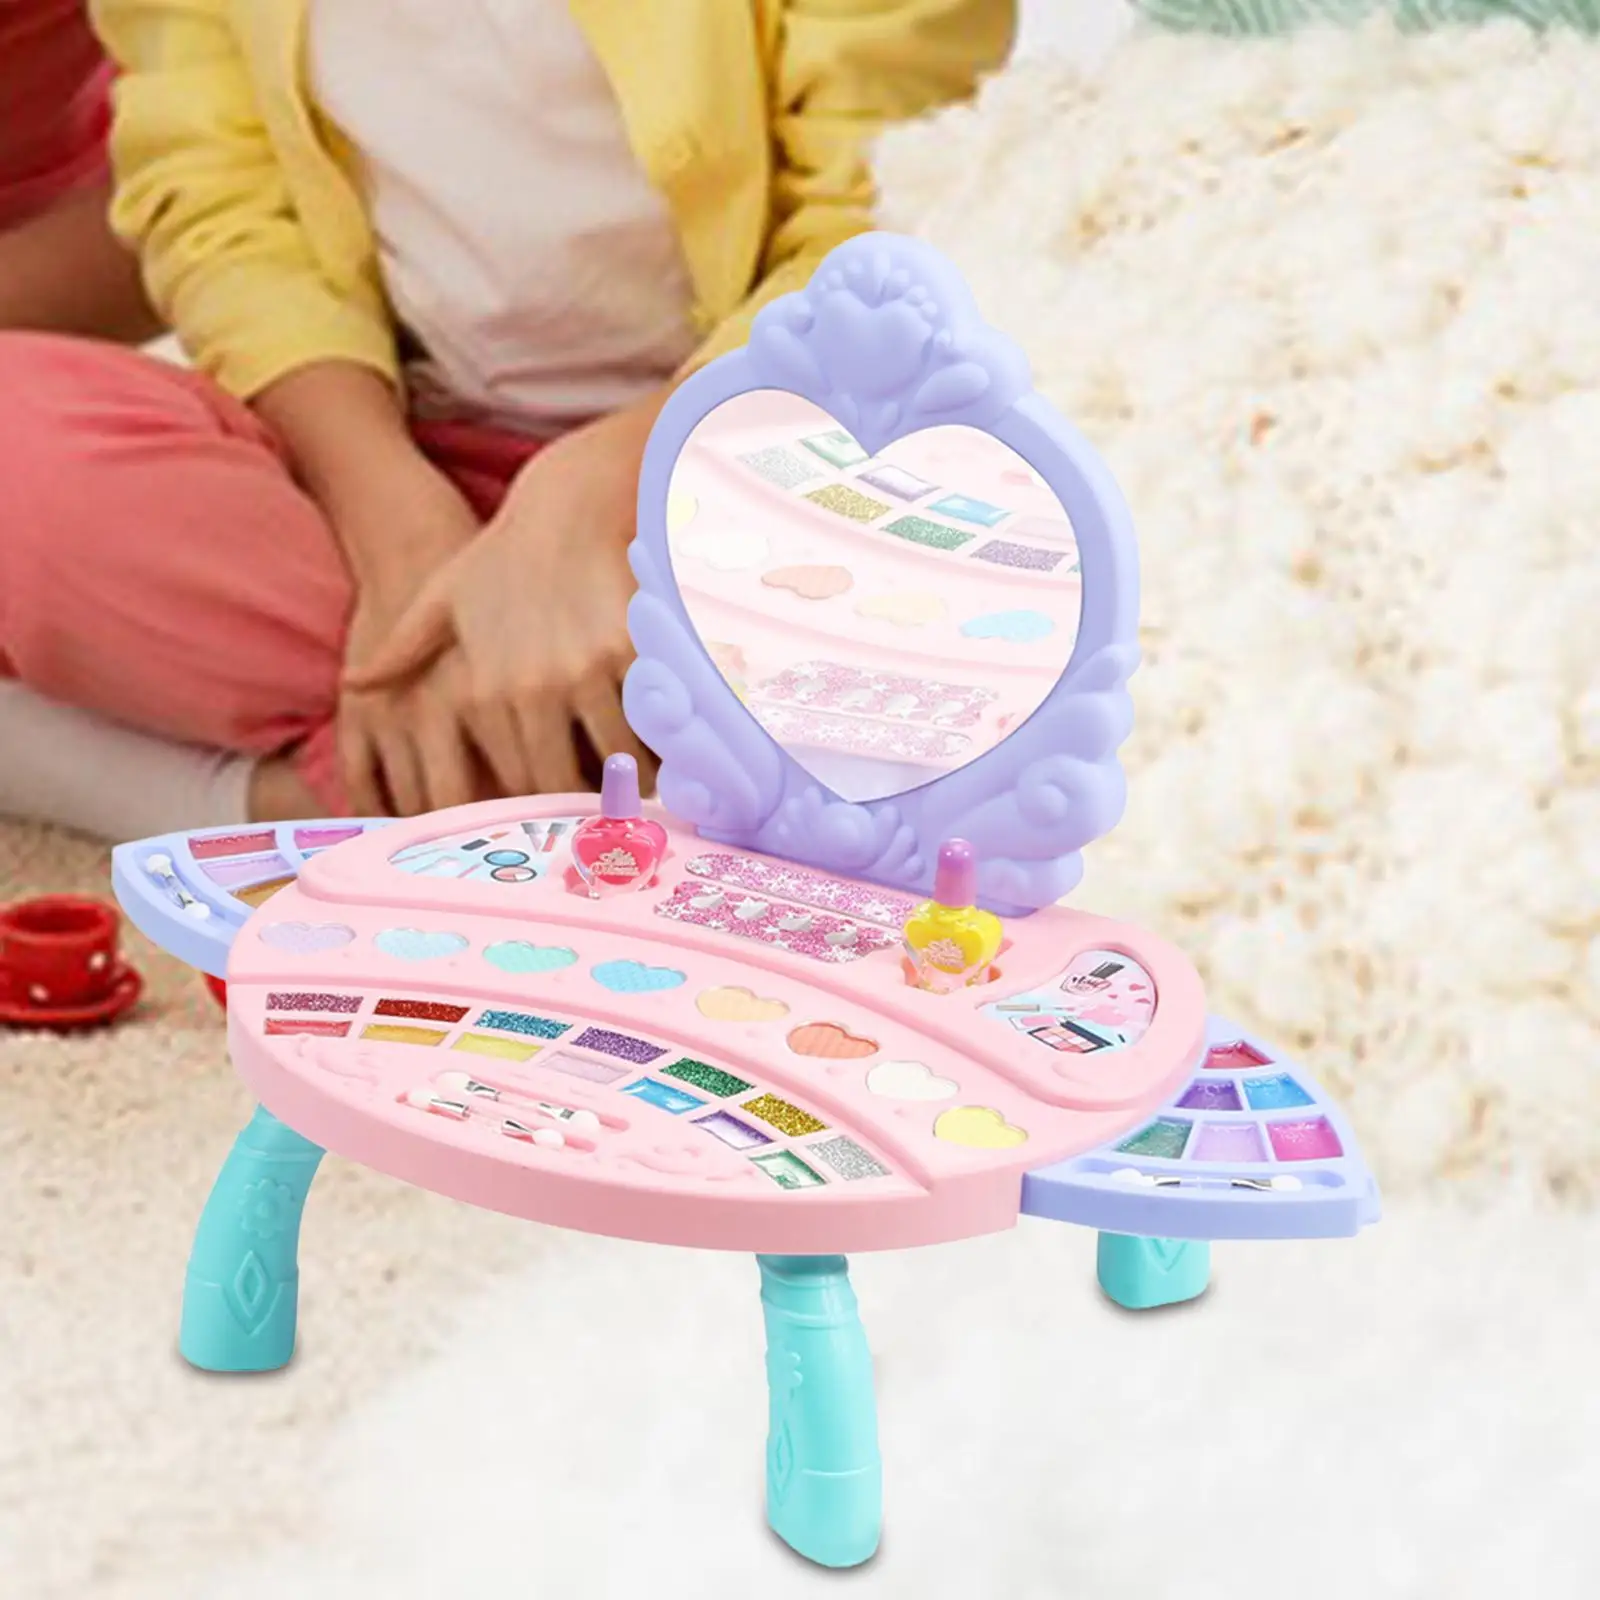 Simulation Kids Makeup Toys Makeup Set Role Play Toys Cosmetics Make up Set for 6~12 Years Girls Holiday Gifts